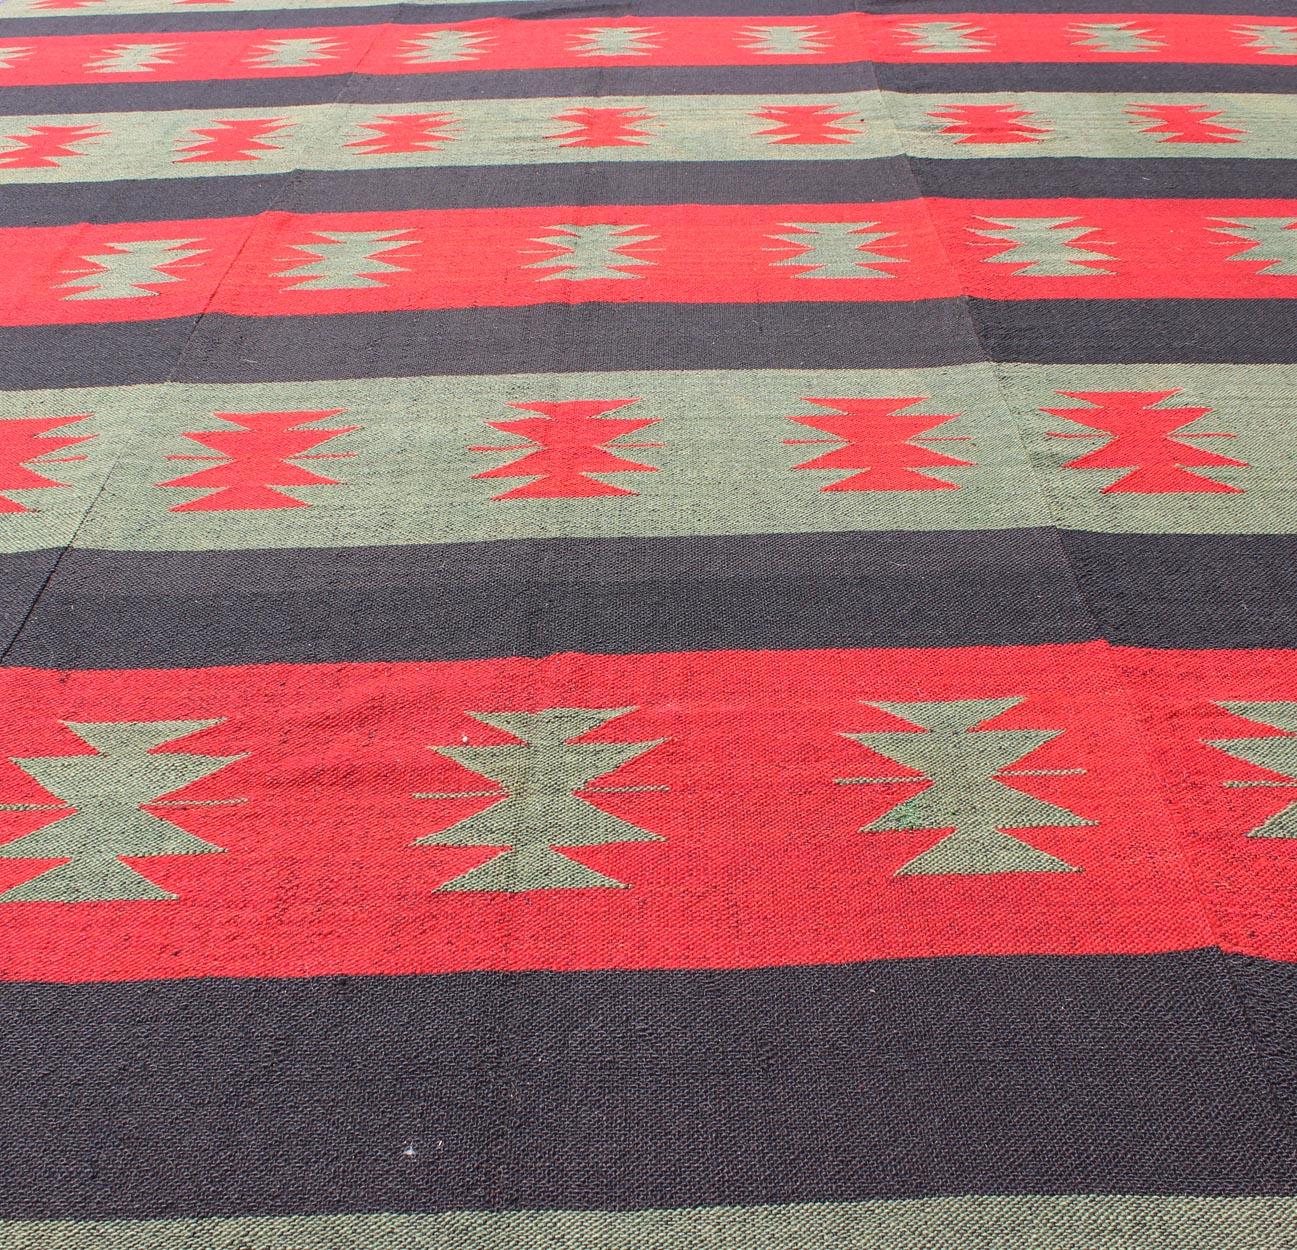 Large Vintage Kilim Rug with Tribal Shapes and Stripes in Red, Brown and Green For Sale 1